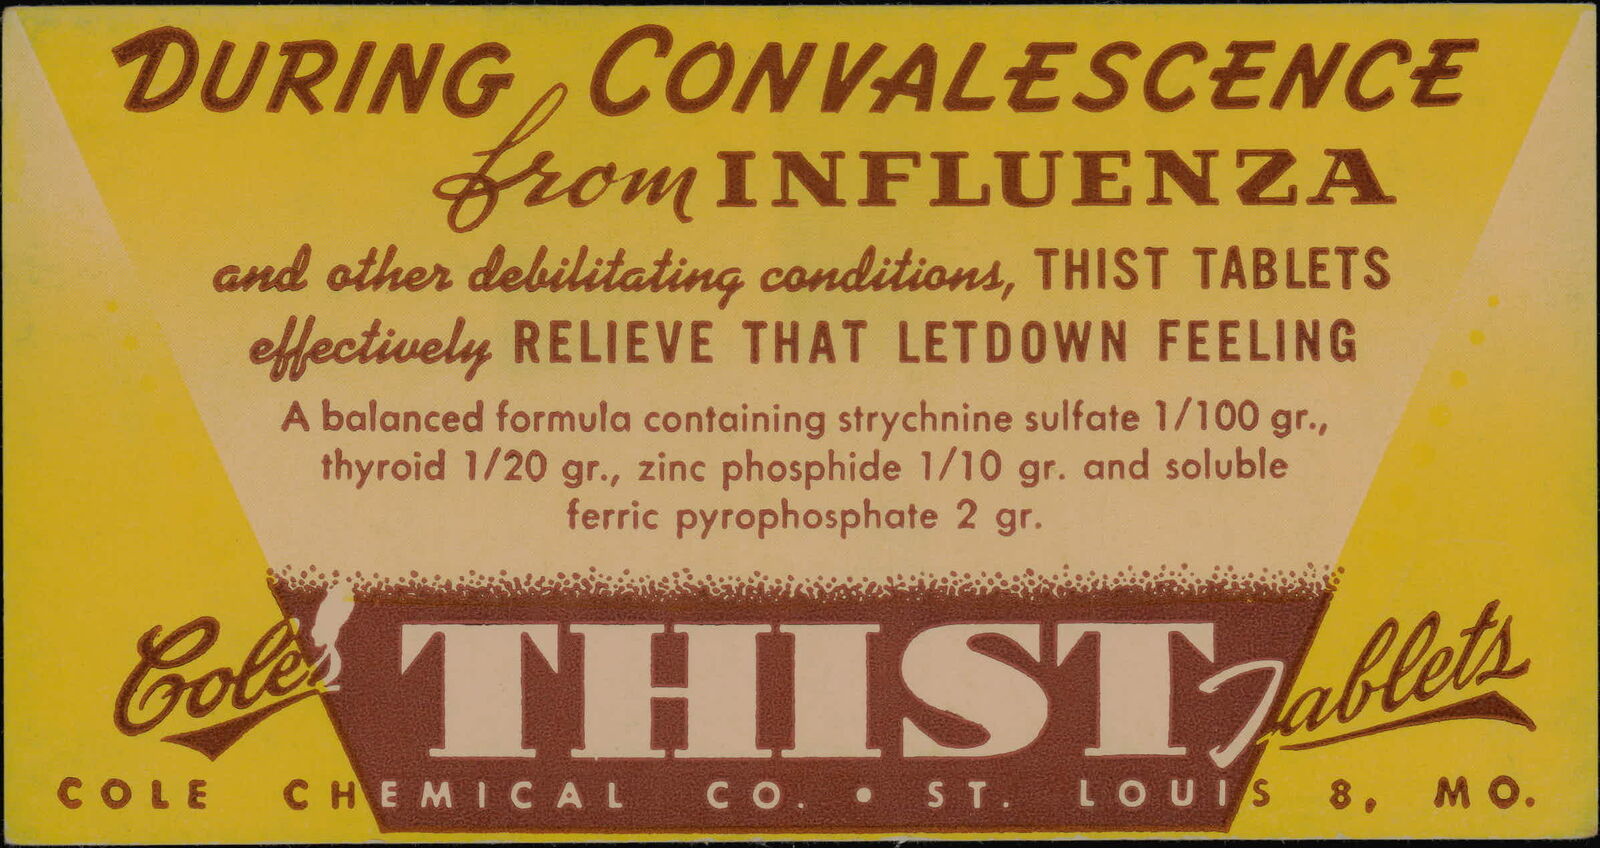 Vintage Advertising Ink Blotter DURING CONVALESCENCE INFLUENZA THIST TABLETS